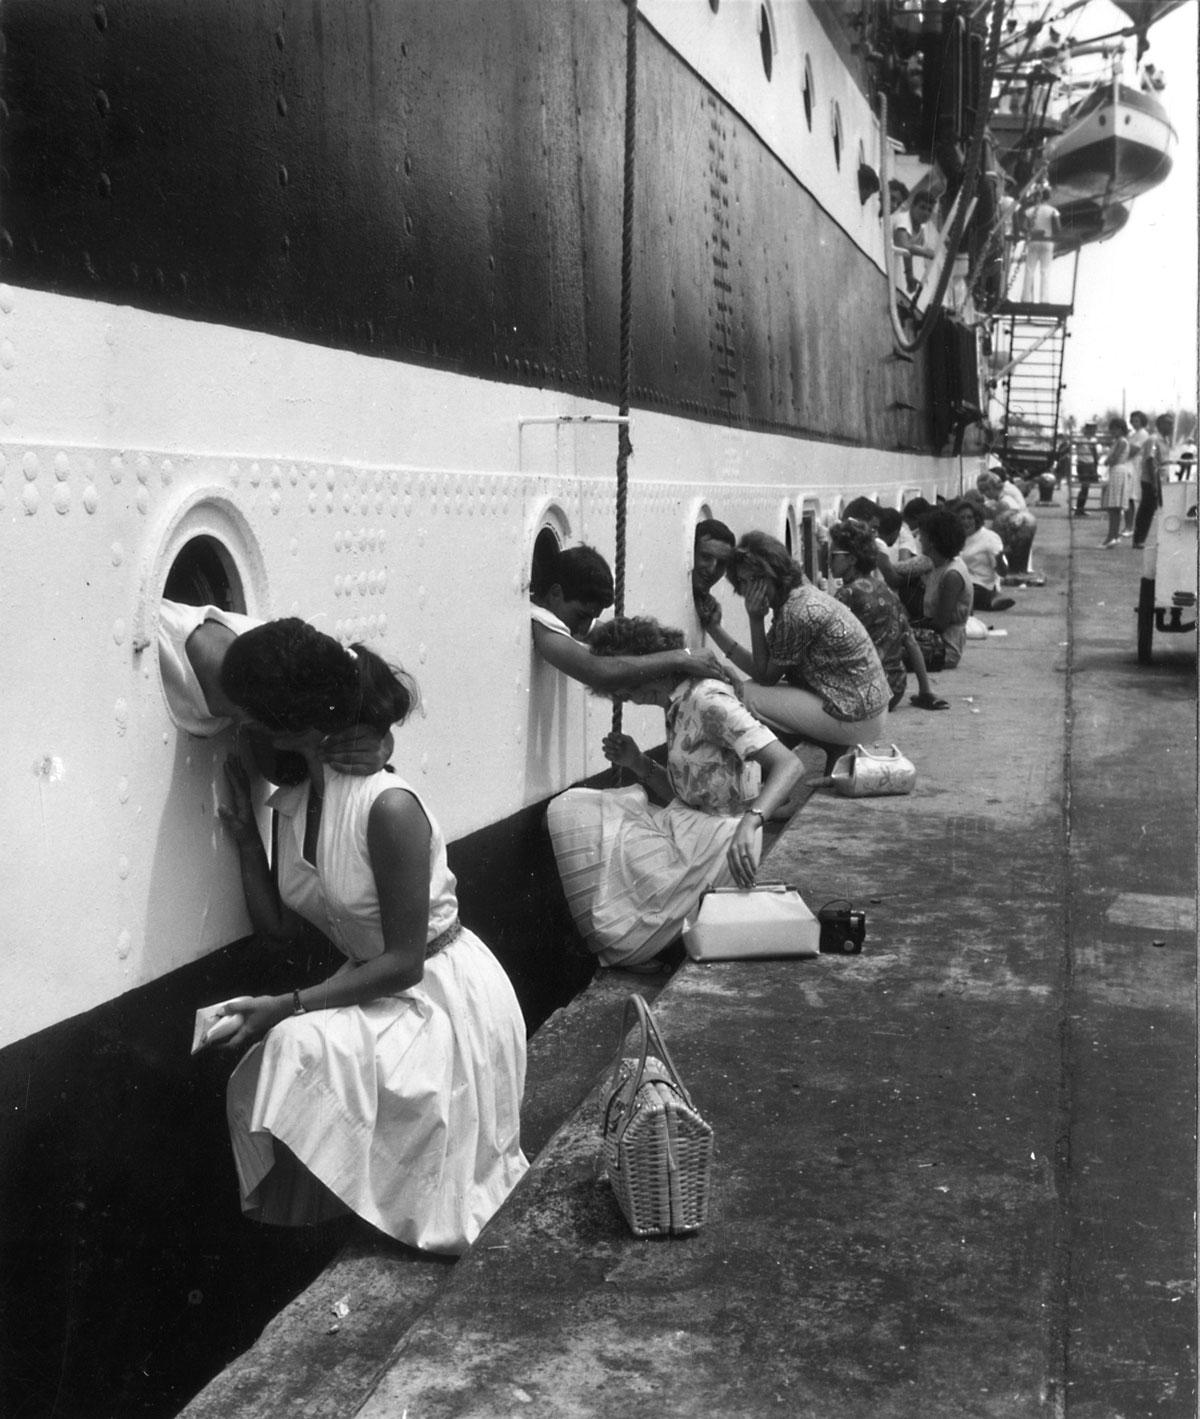 In 1963, wives say goodbye to their loved ones in the Navy.